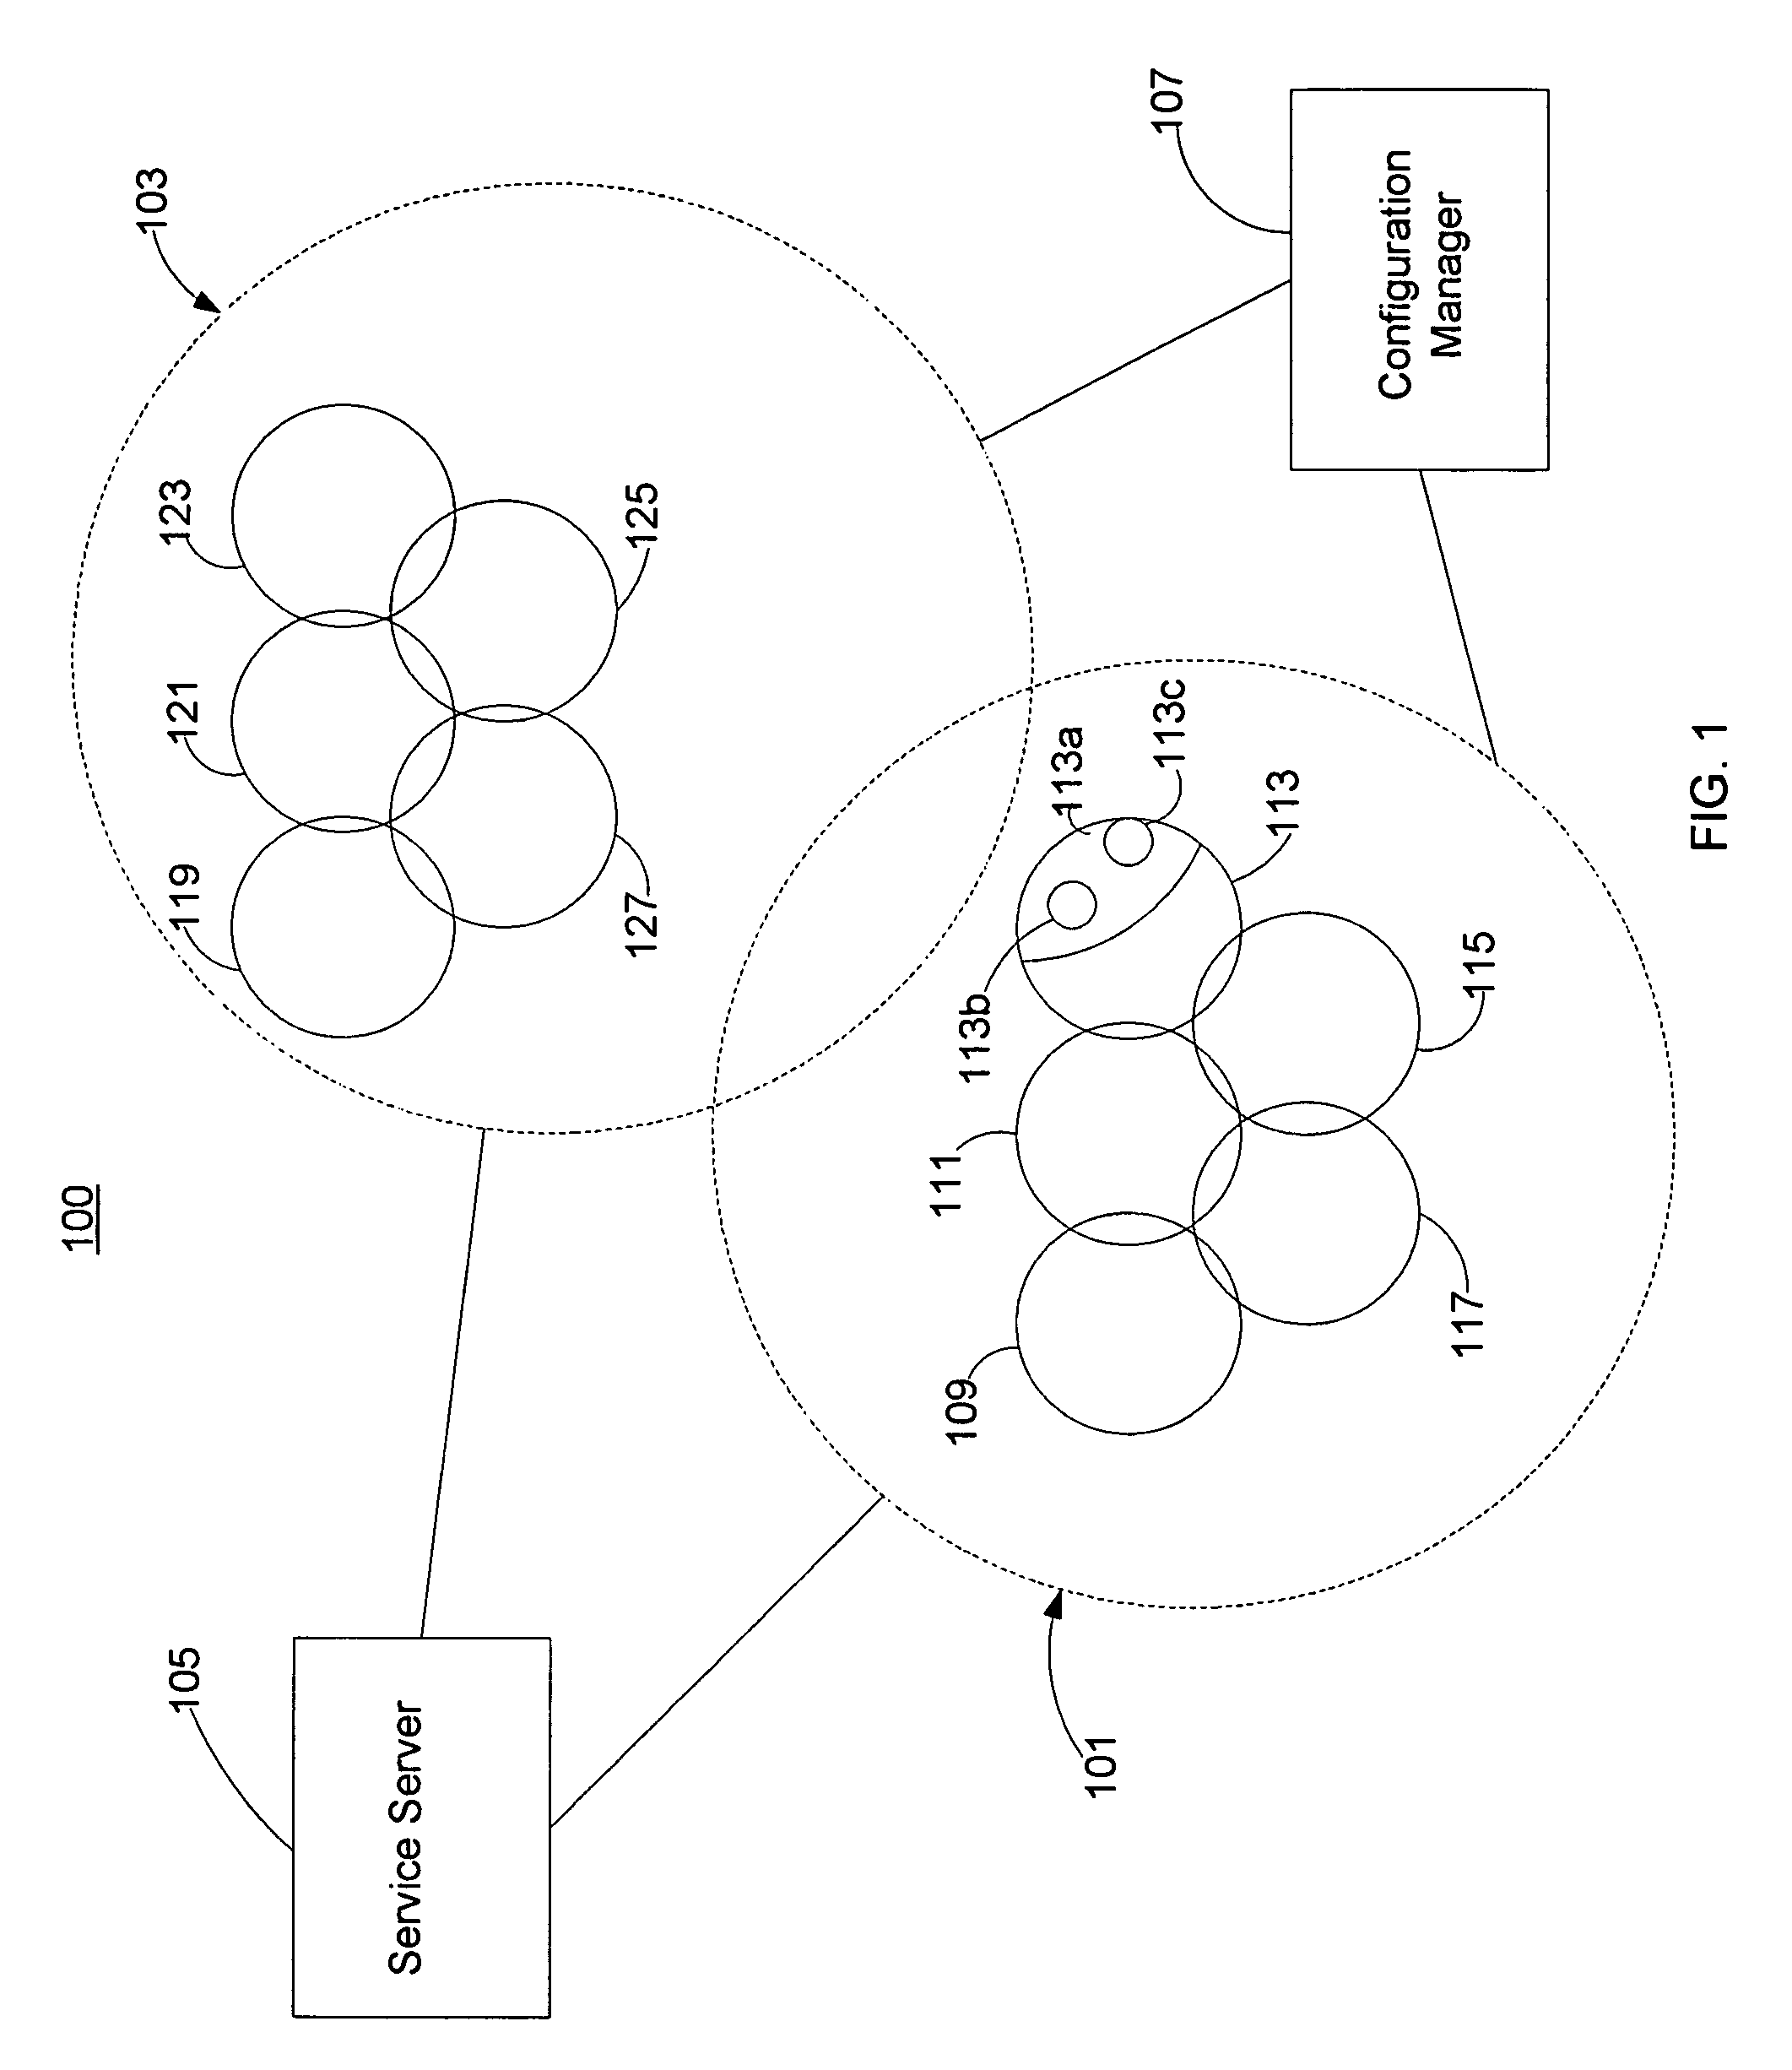 Use of signaling for auto-configuration of modulators and repeaters